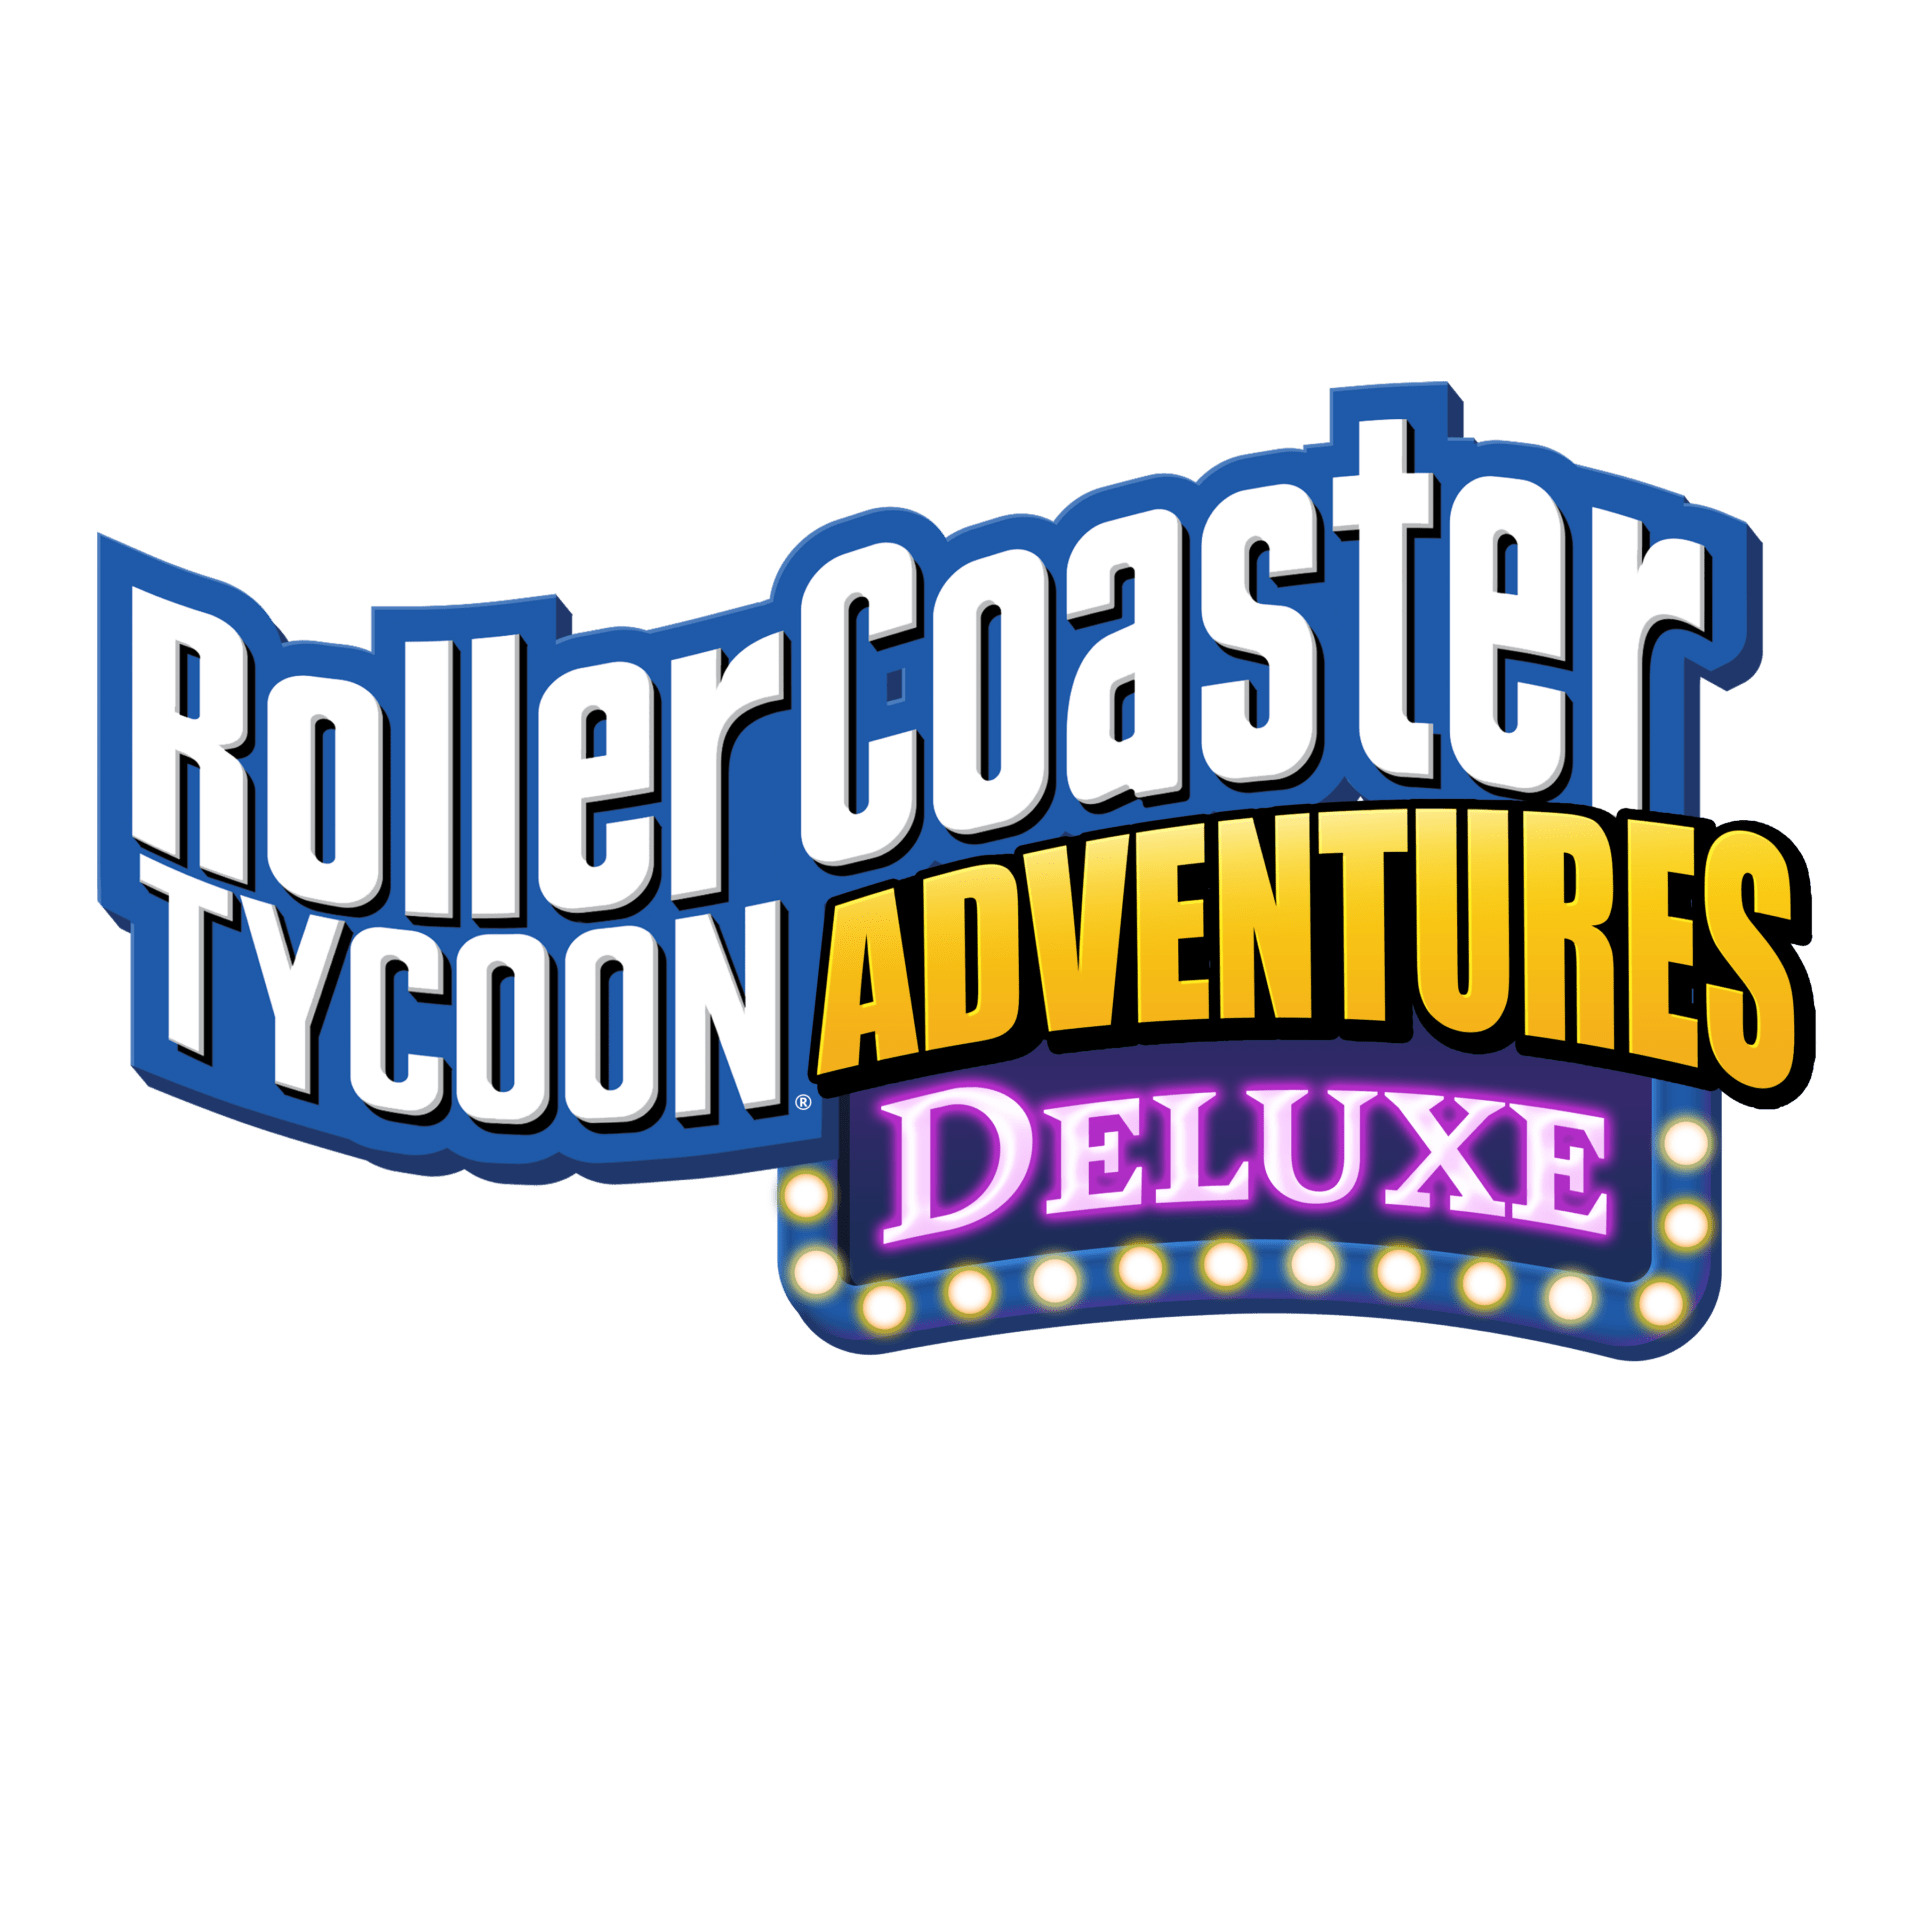 Rollercoaster Tycoon Adventures Deluxe Switch Review 